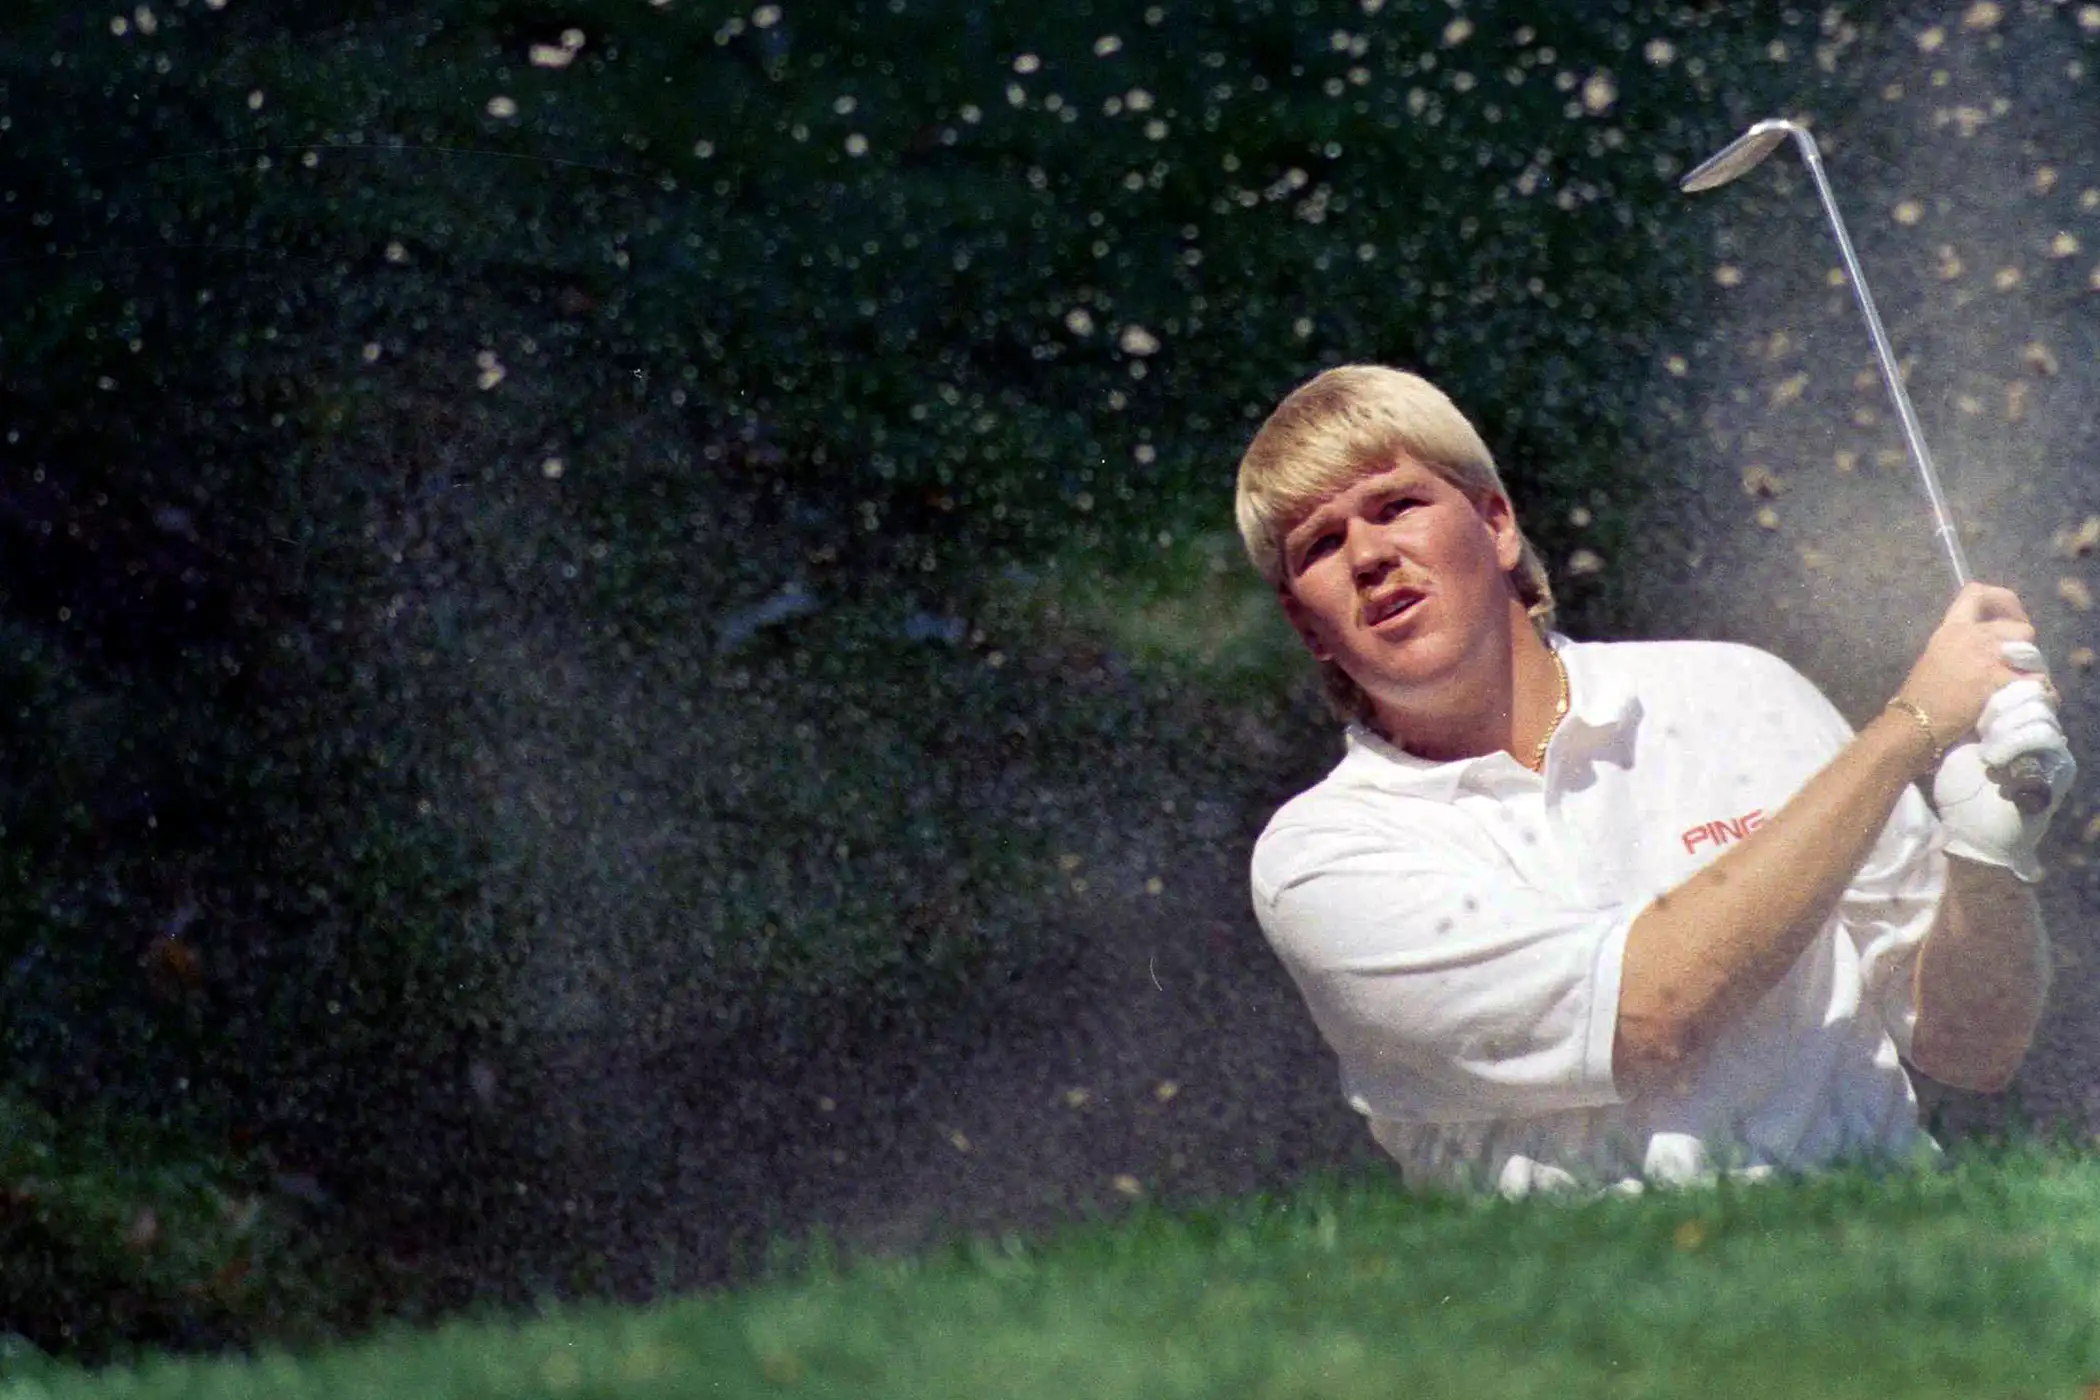 John Daly of Memphis, Tenn., blasts one out of a trap on the ninth hole during third round action at the PGA Championship Carmel, Indiana on Saturday, August 10, 1991.